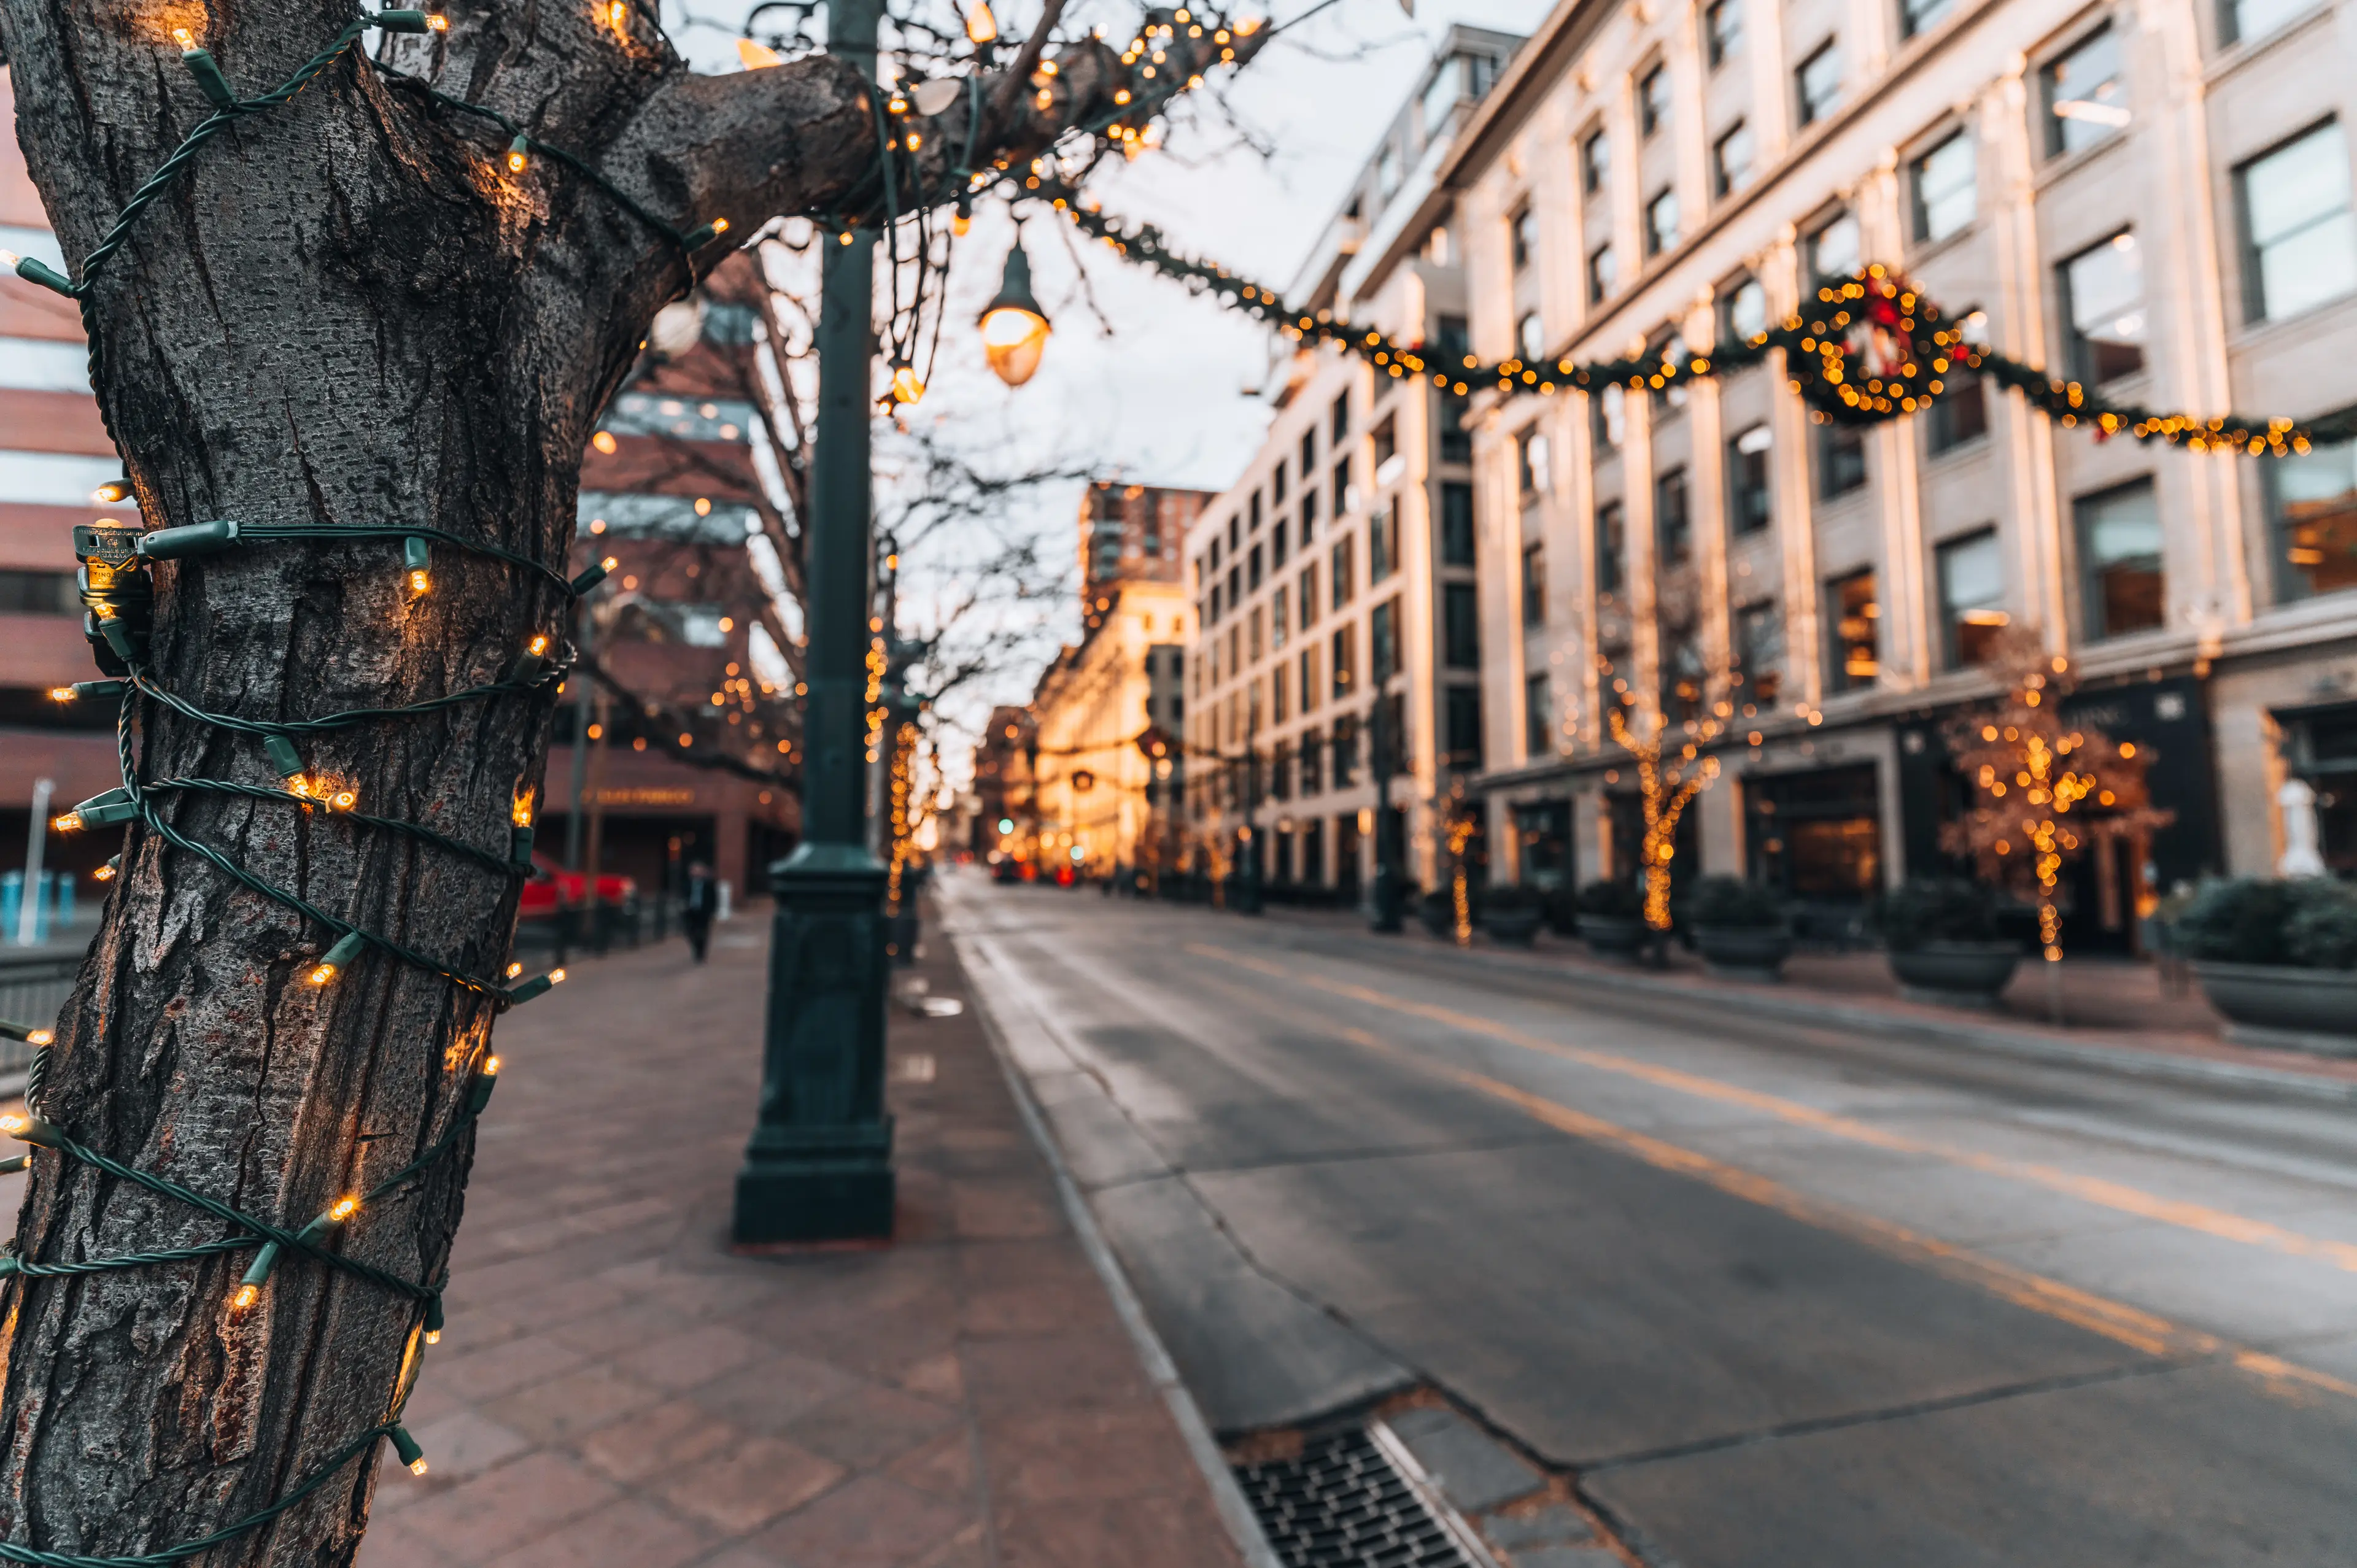 5-Day Christmas Holiday Itinerary for Couples in Denver, Colorado